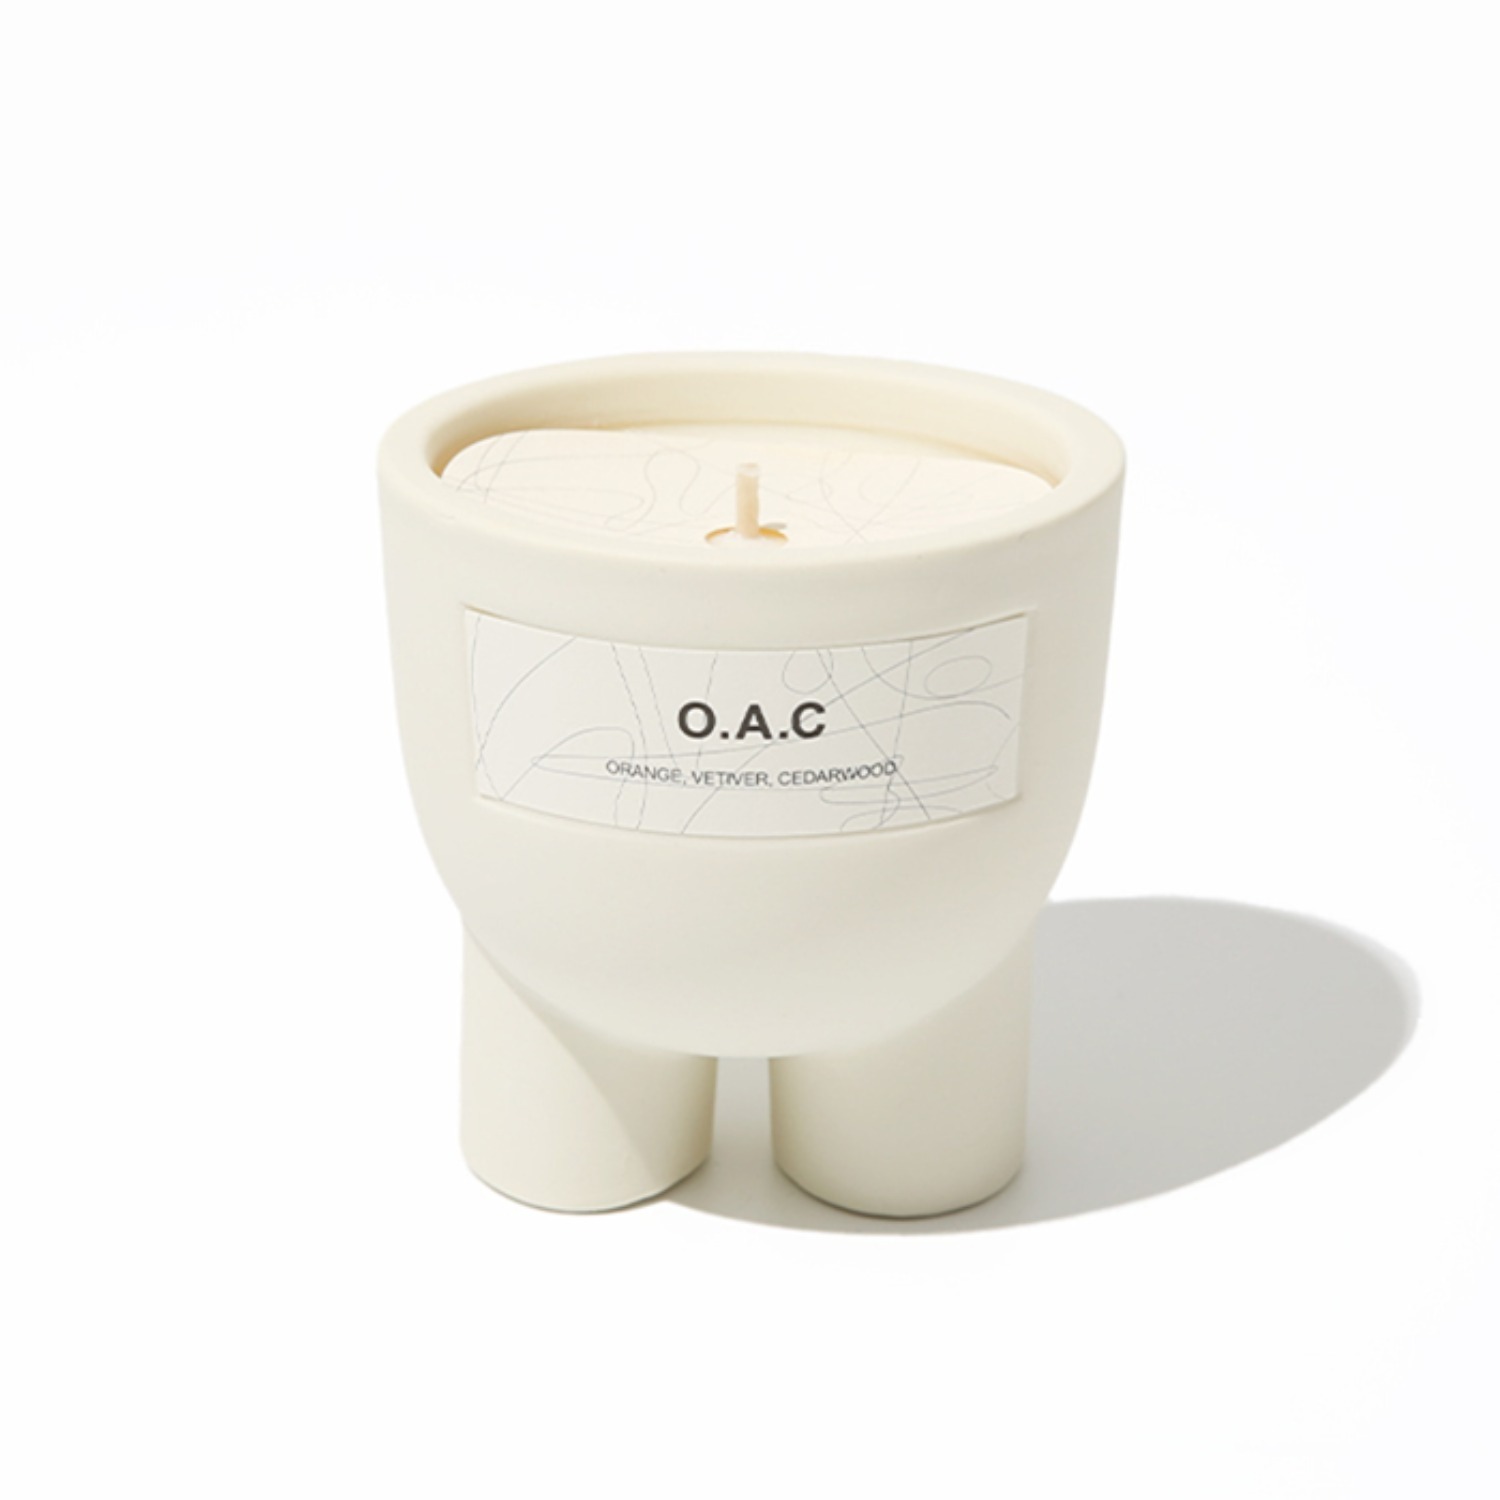 O.A.C scented objet candle 190g